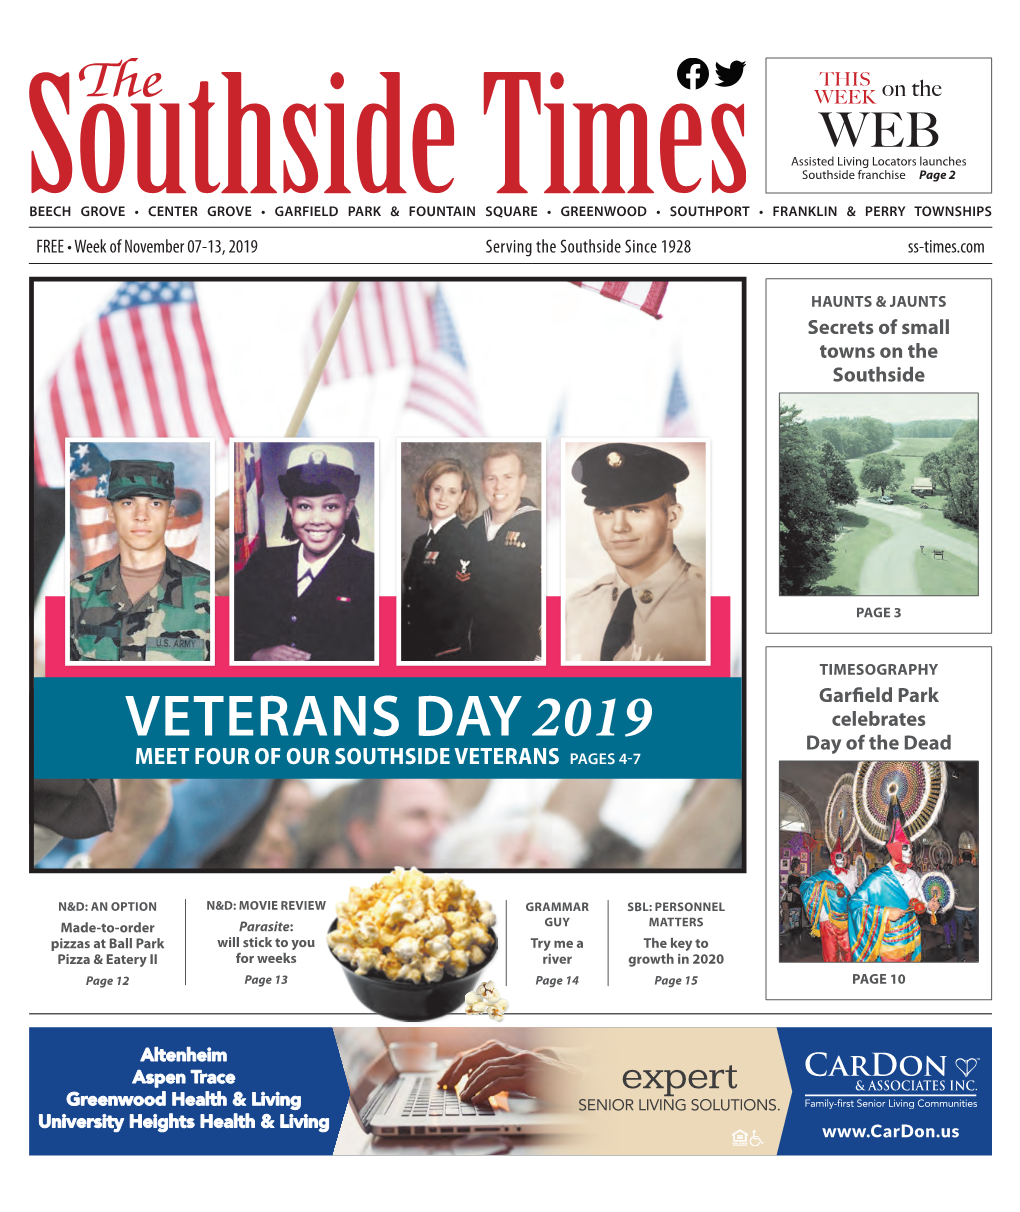 VETERANS DAY 2019 Day of the Dead MEET FOUR of OUR SOUTHSIDE VETERANS PAGES 4-7